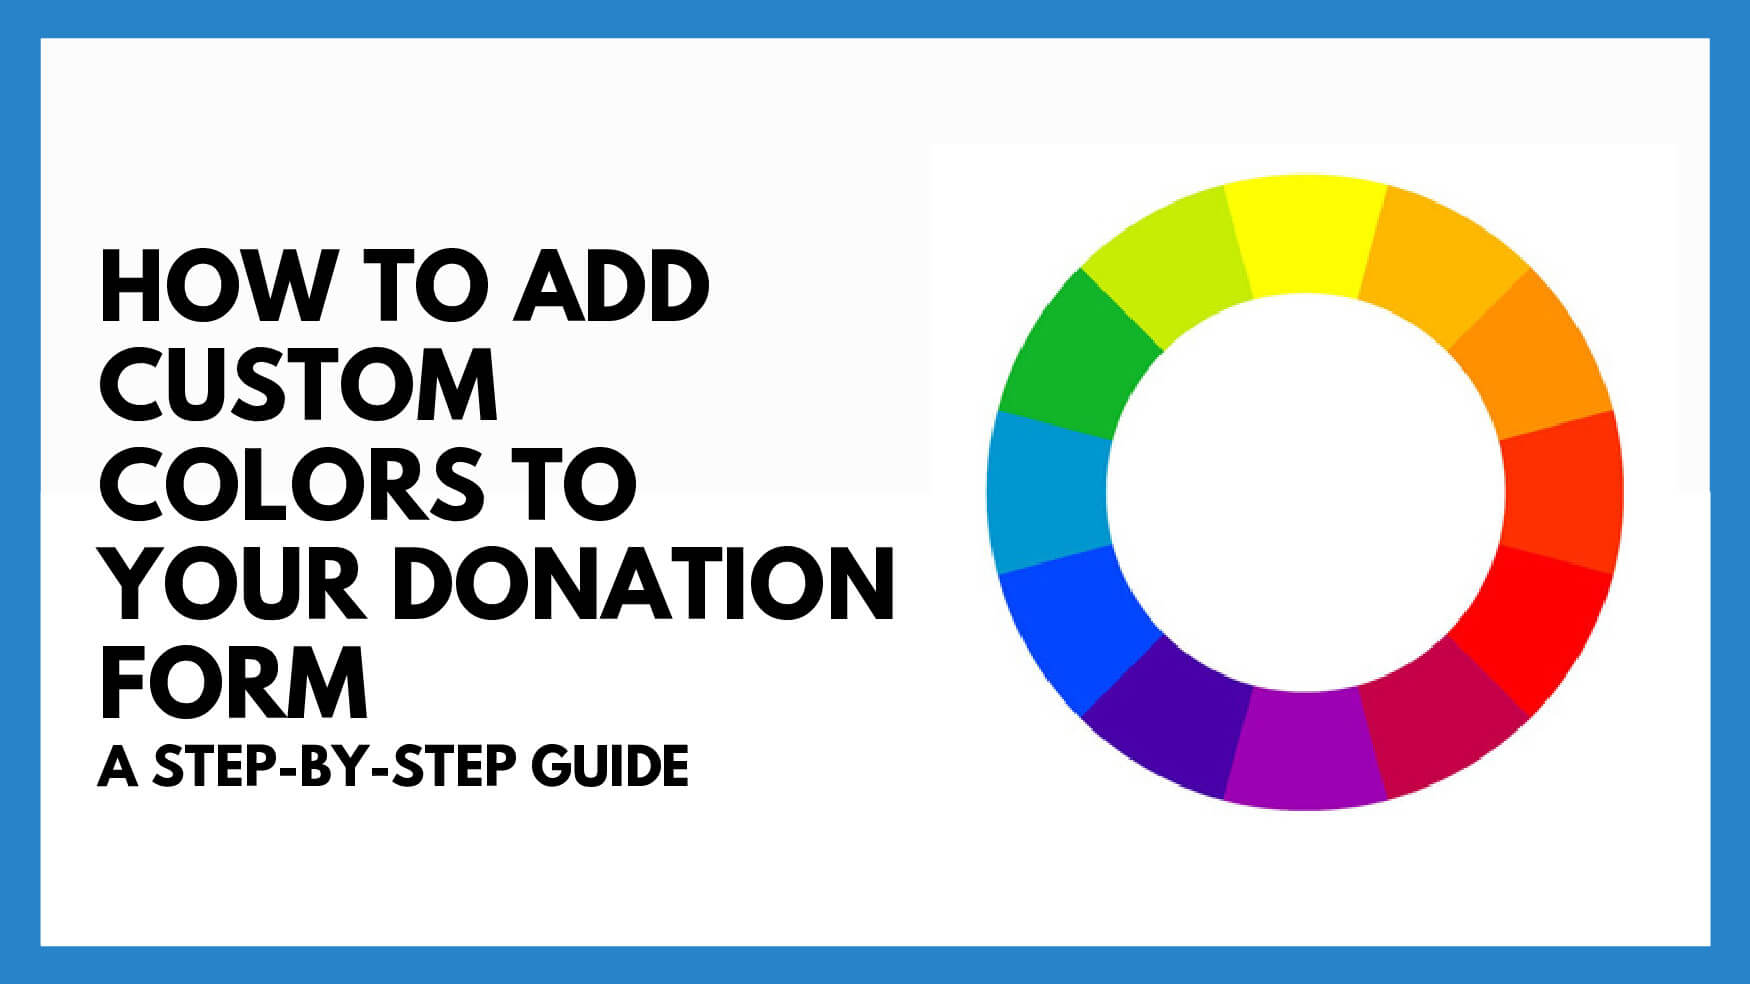 How To Add Custom Colors To your Donation Form: A Step-by-Step Guide